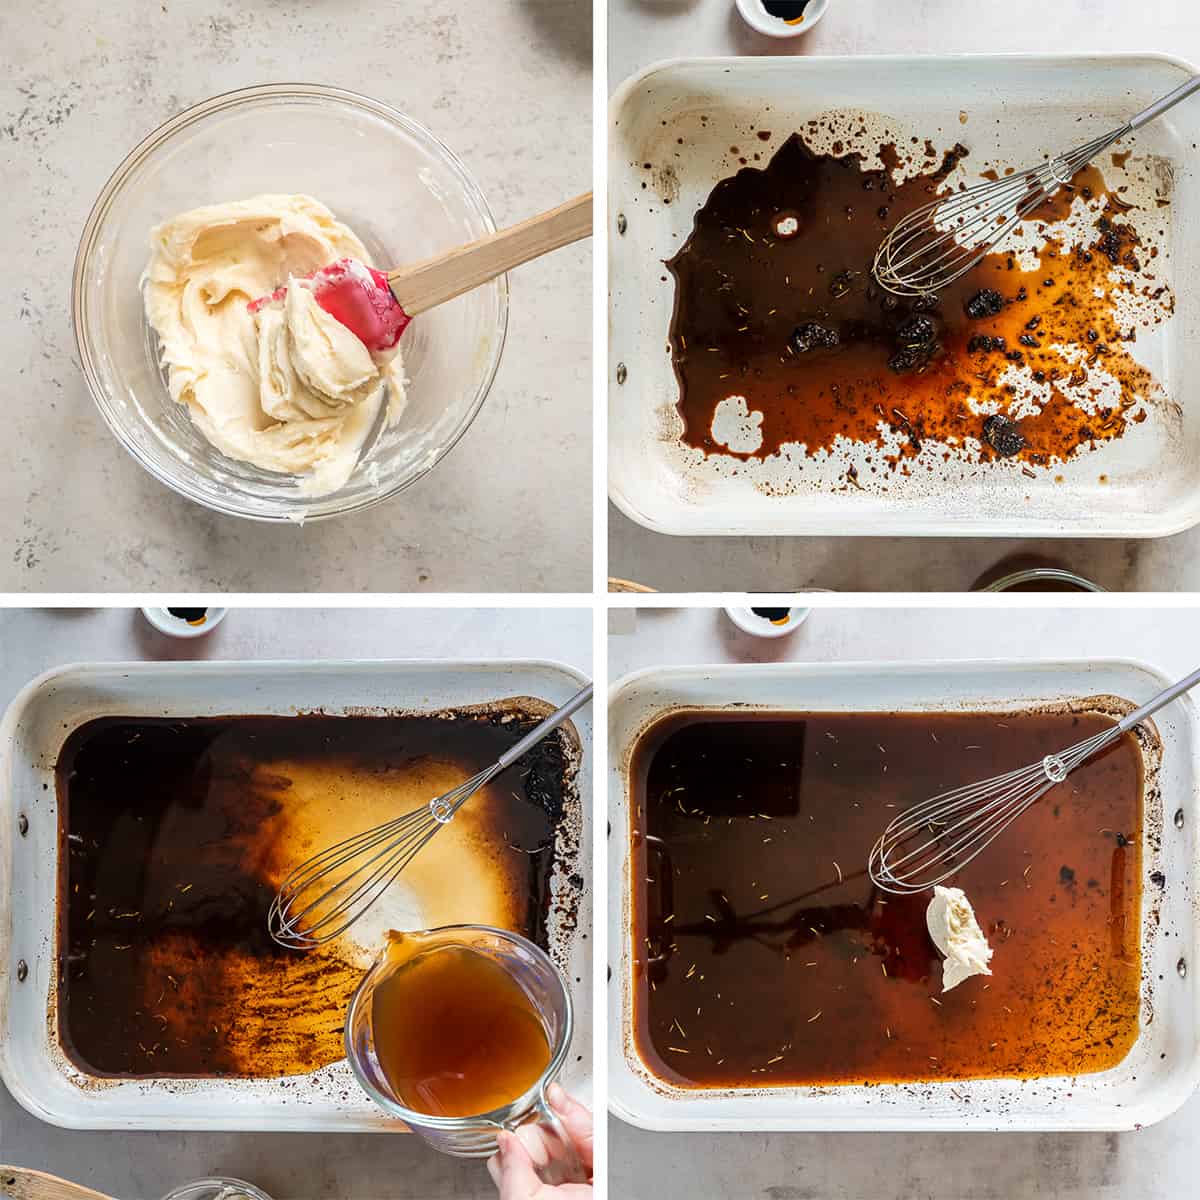 Four images of a butter flour mixture thickening gravy ingredients in a roasting pan.